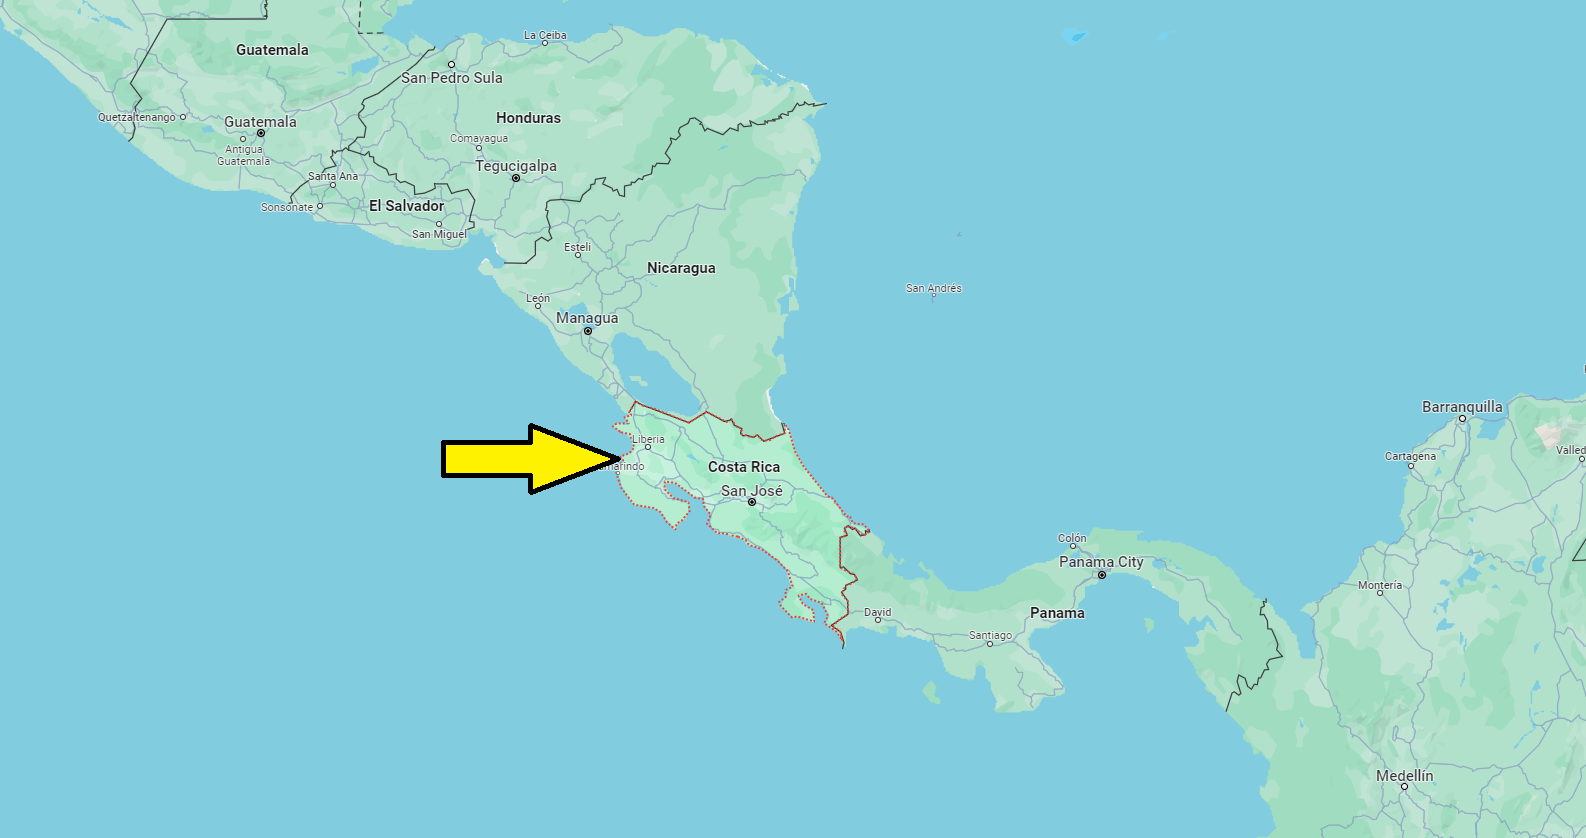 Is Costa Rica in North or South America